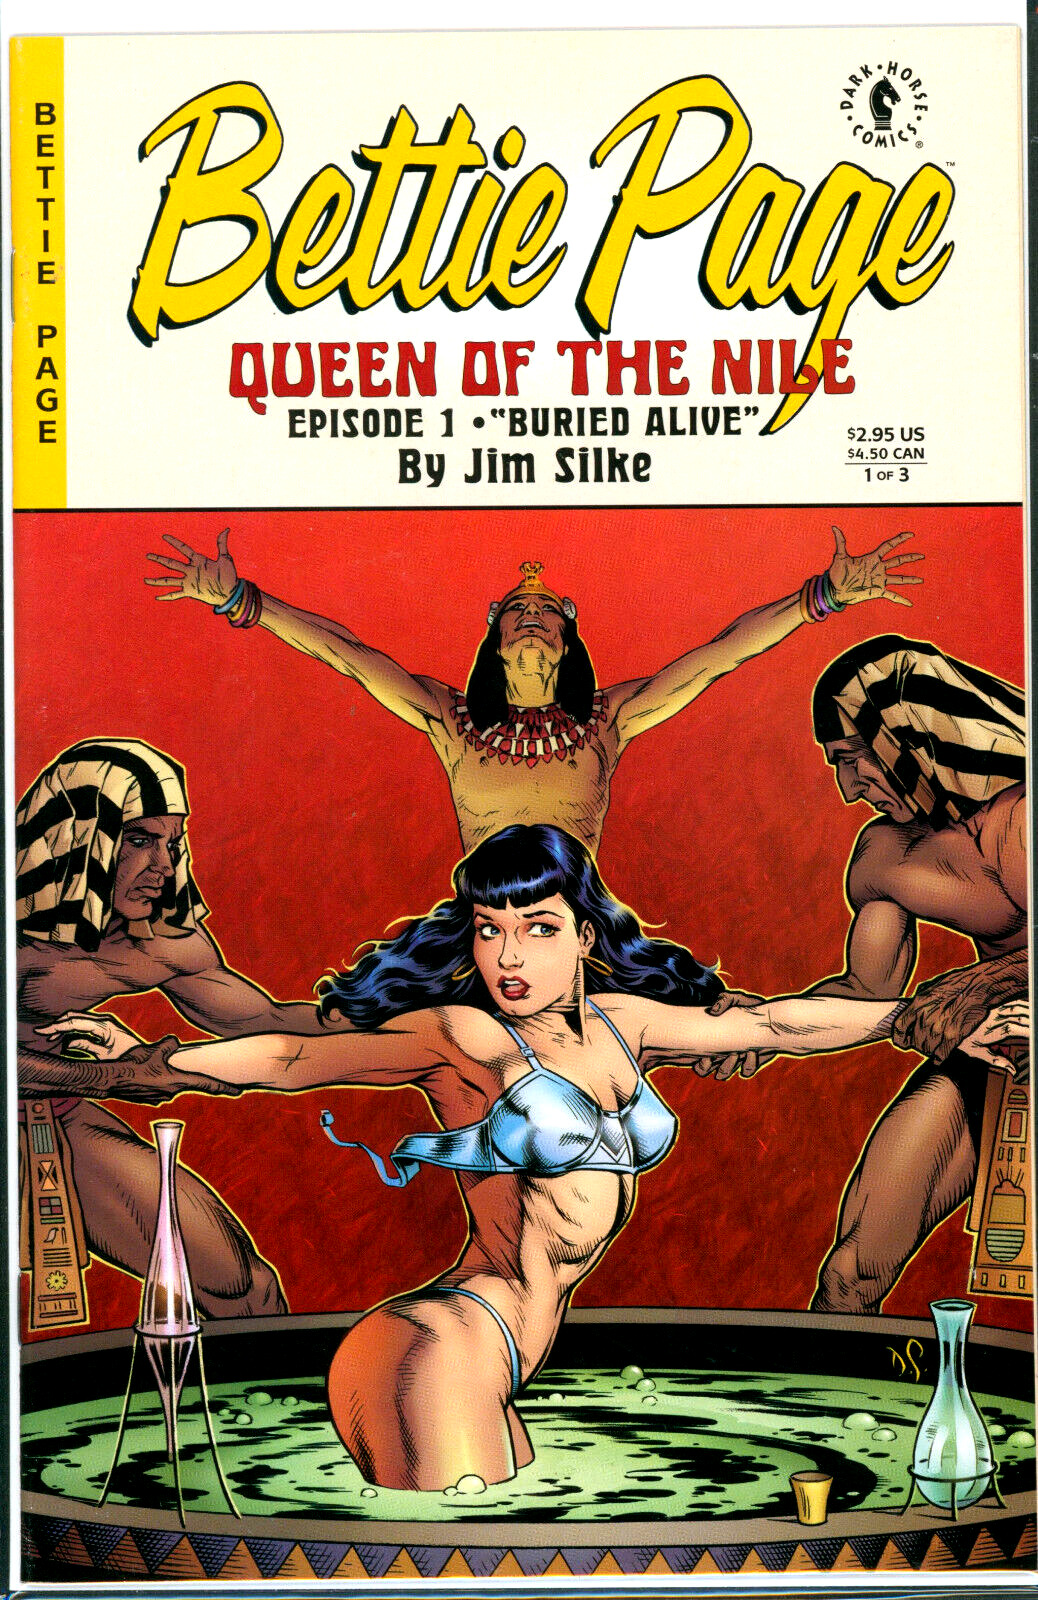 Bettie Page: Queen of the Nile #1 Dark Horse Comics 1999 Dave Stevens VF/NM